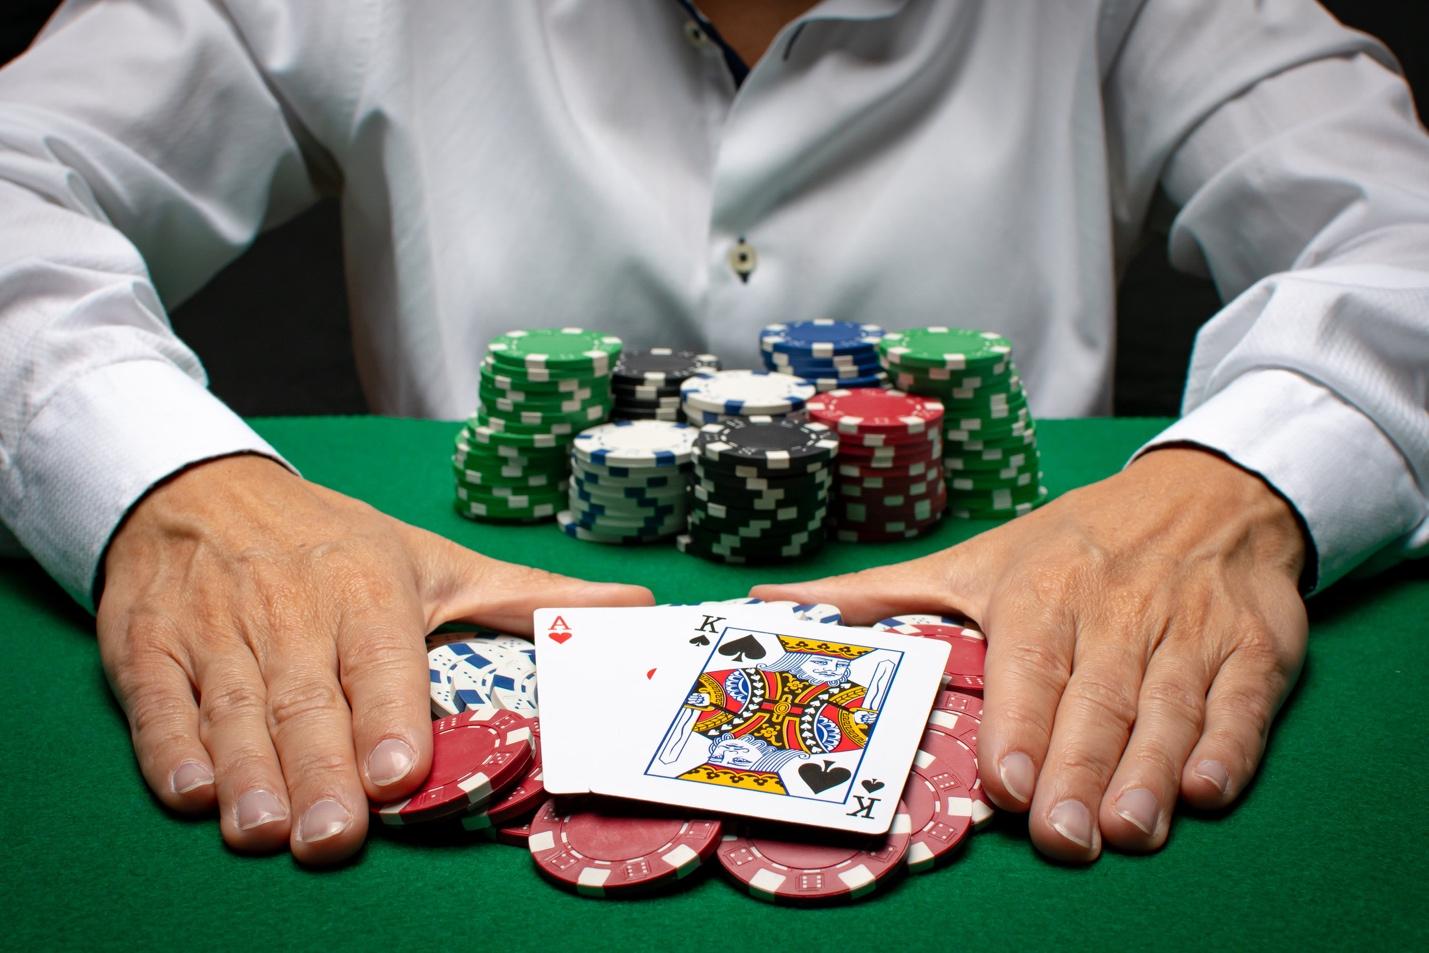 A picture containing text, person, gambling house

Description automatically generated